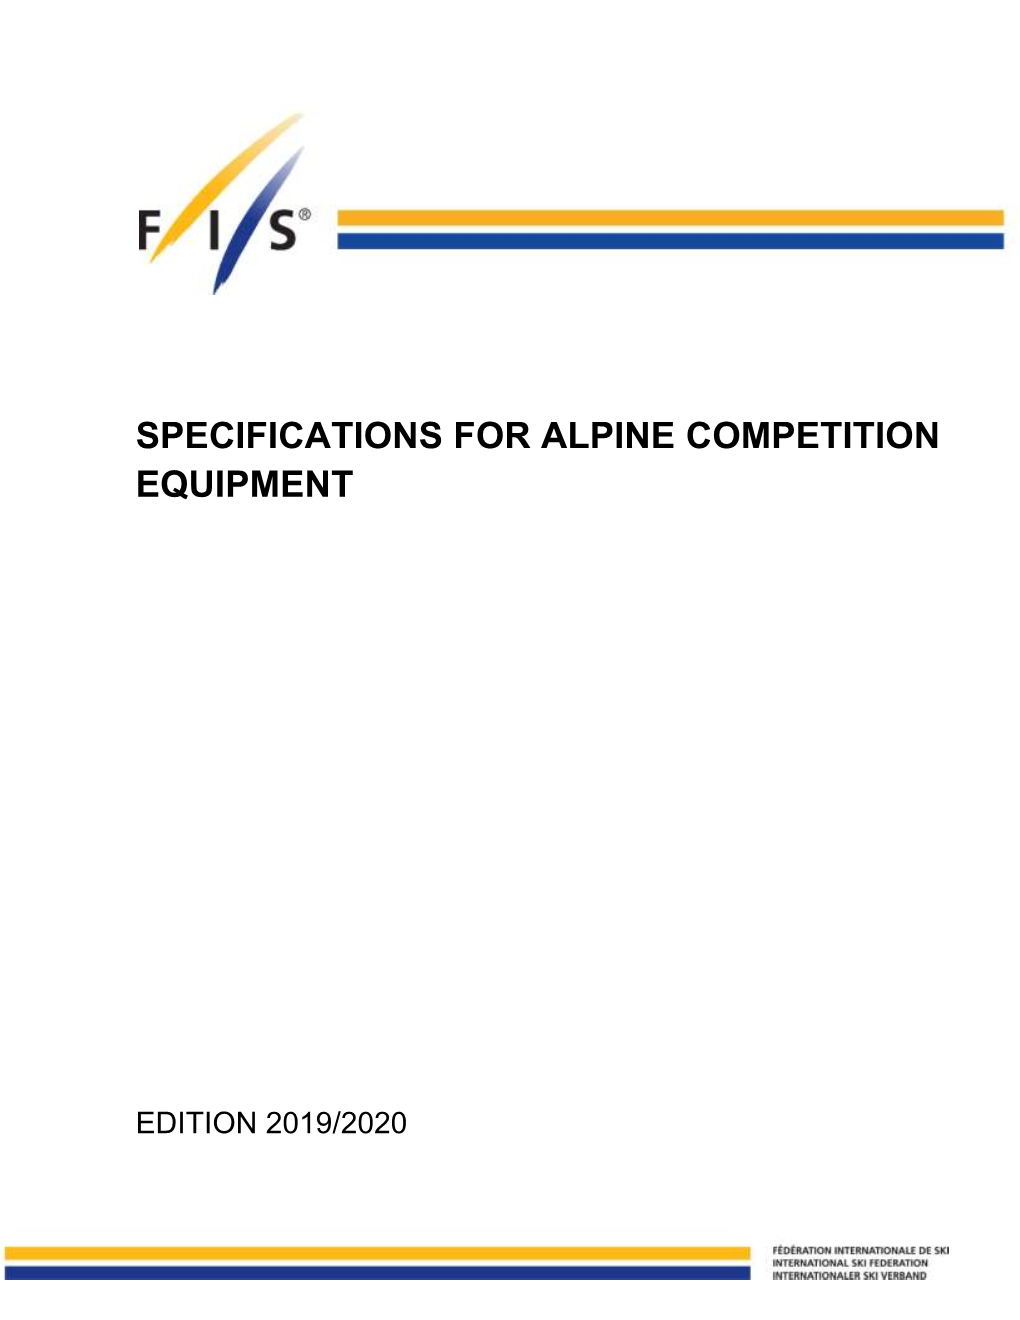 Specifications for Alpine Competition Equipment